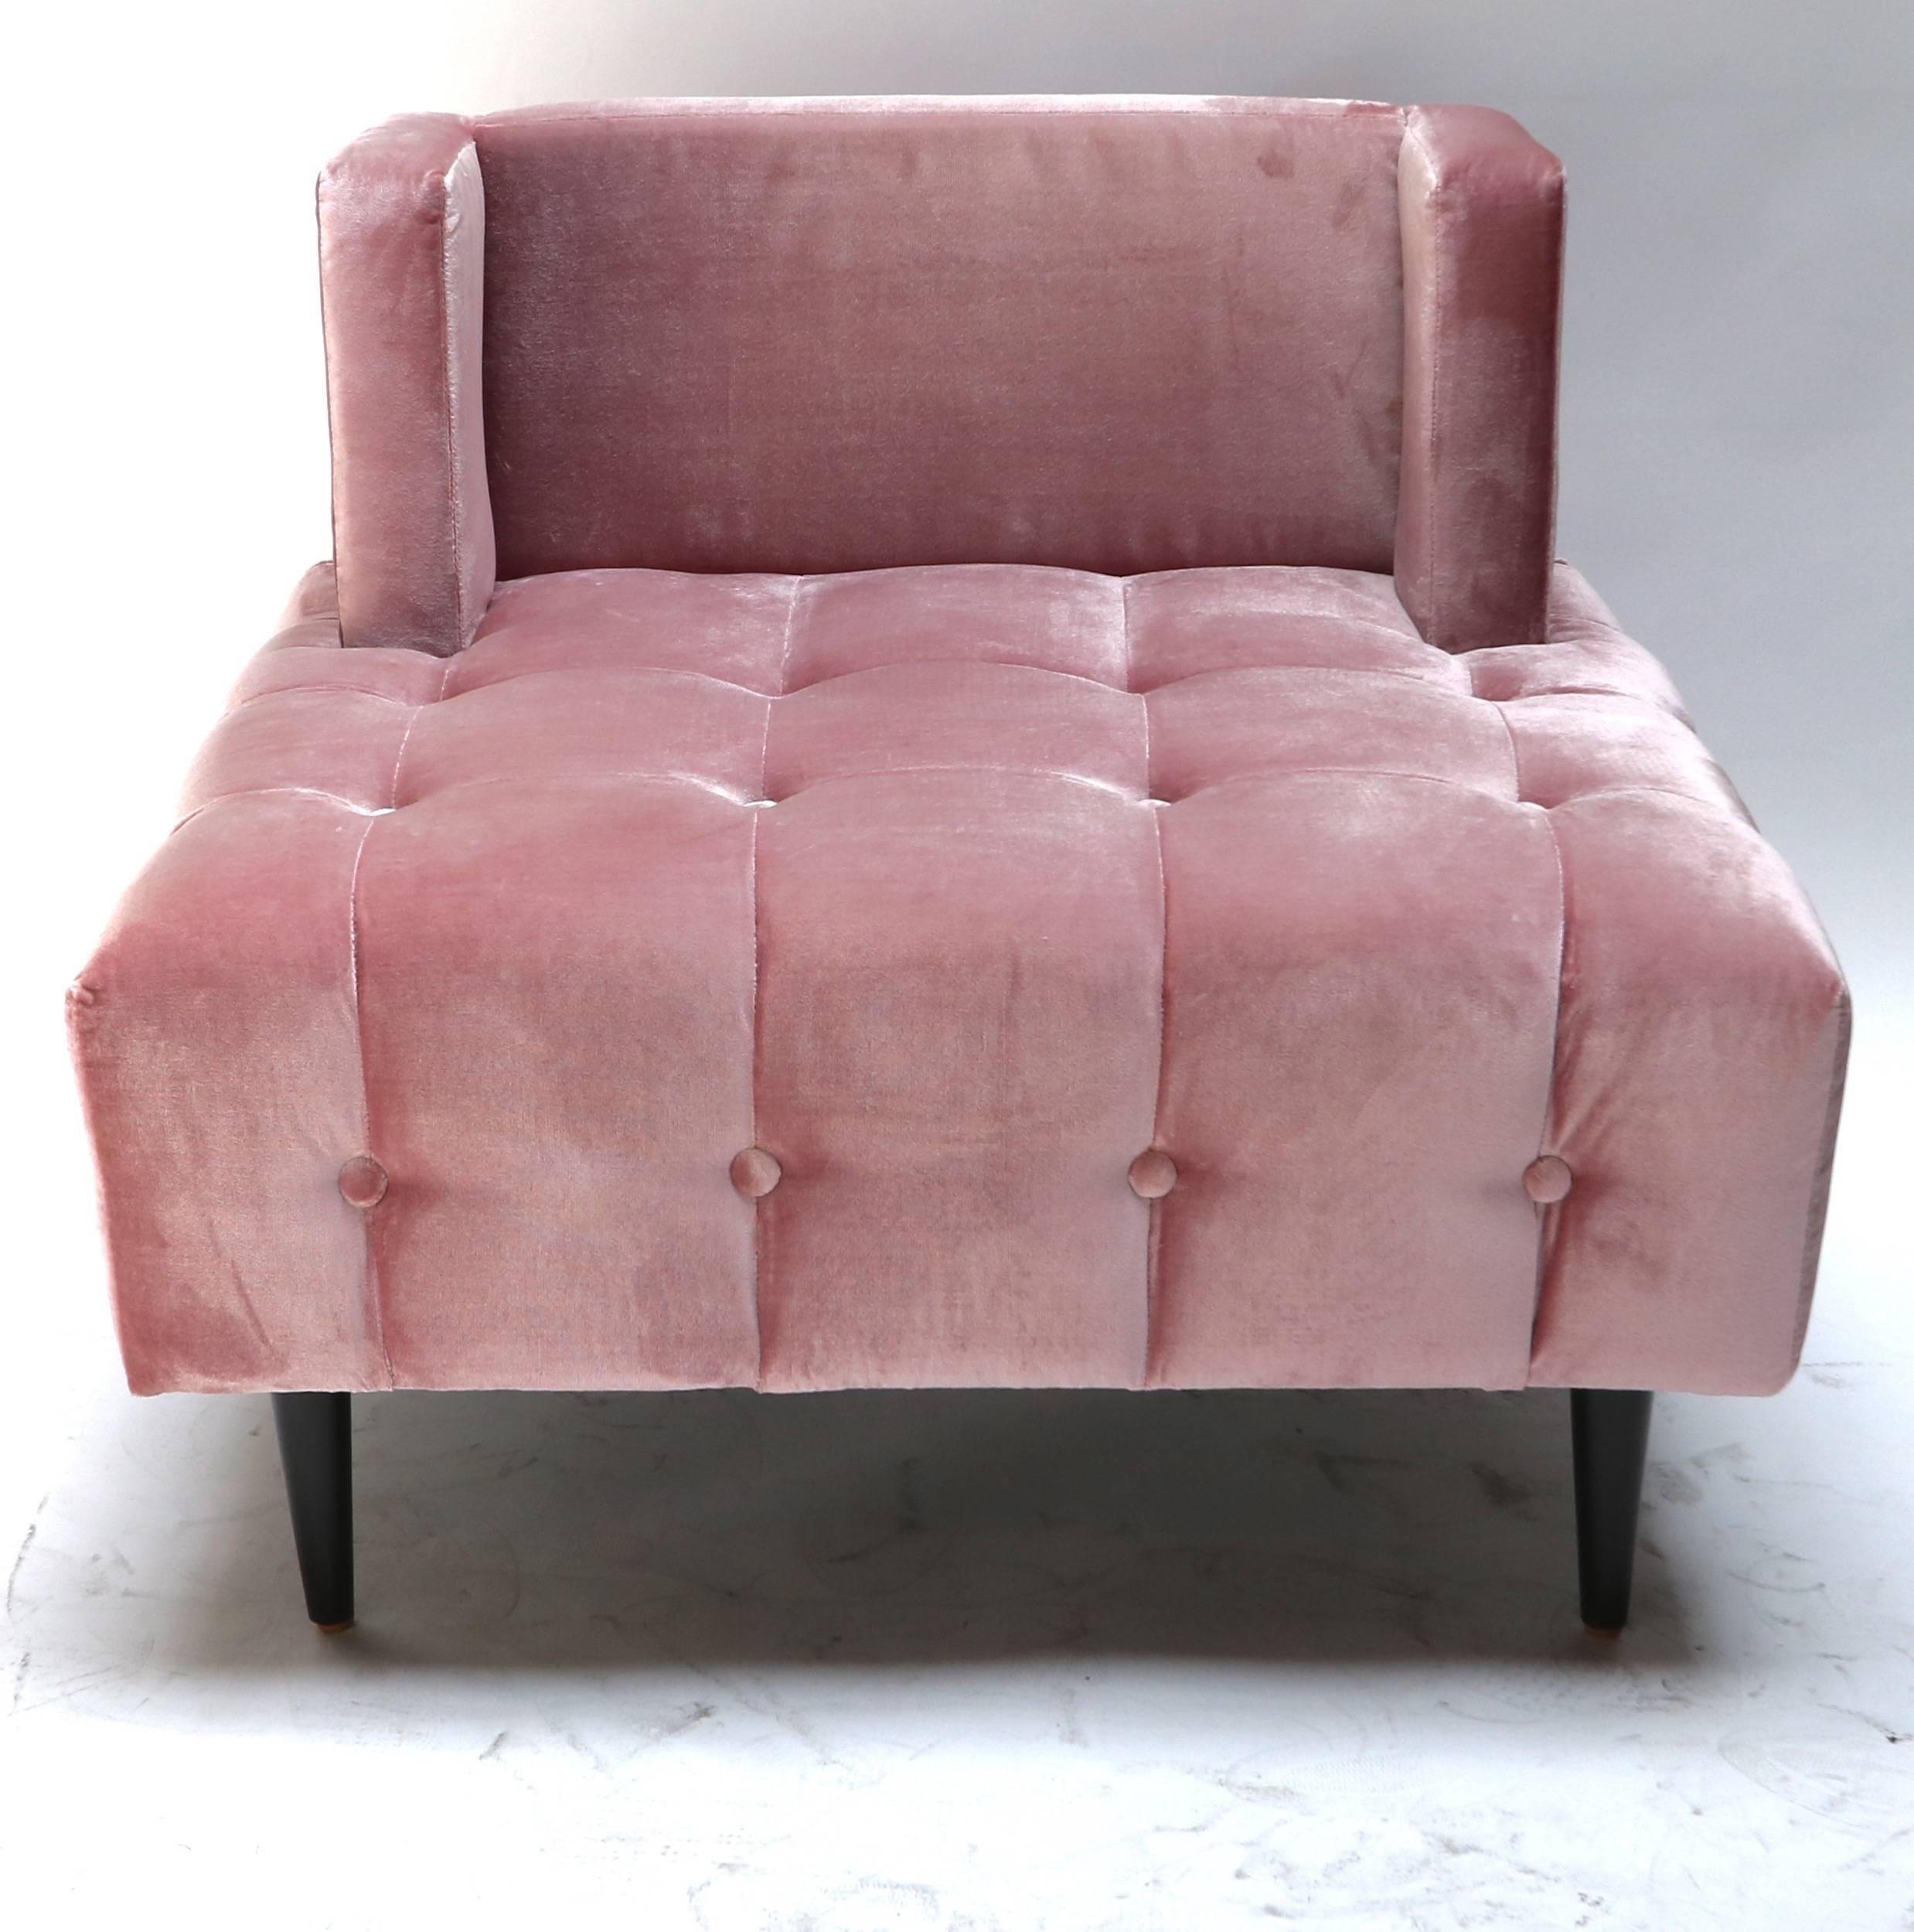 Pair of custom tufted lounge chairs upholstered in pink silk velvet with wood legs. Made in Los Angeles by Adesso Imports.

Can be done in different colors and fabrics.

Sale price for floor model only